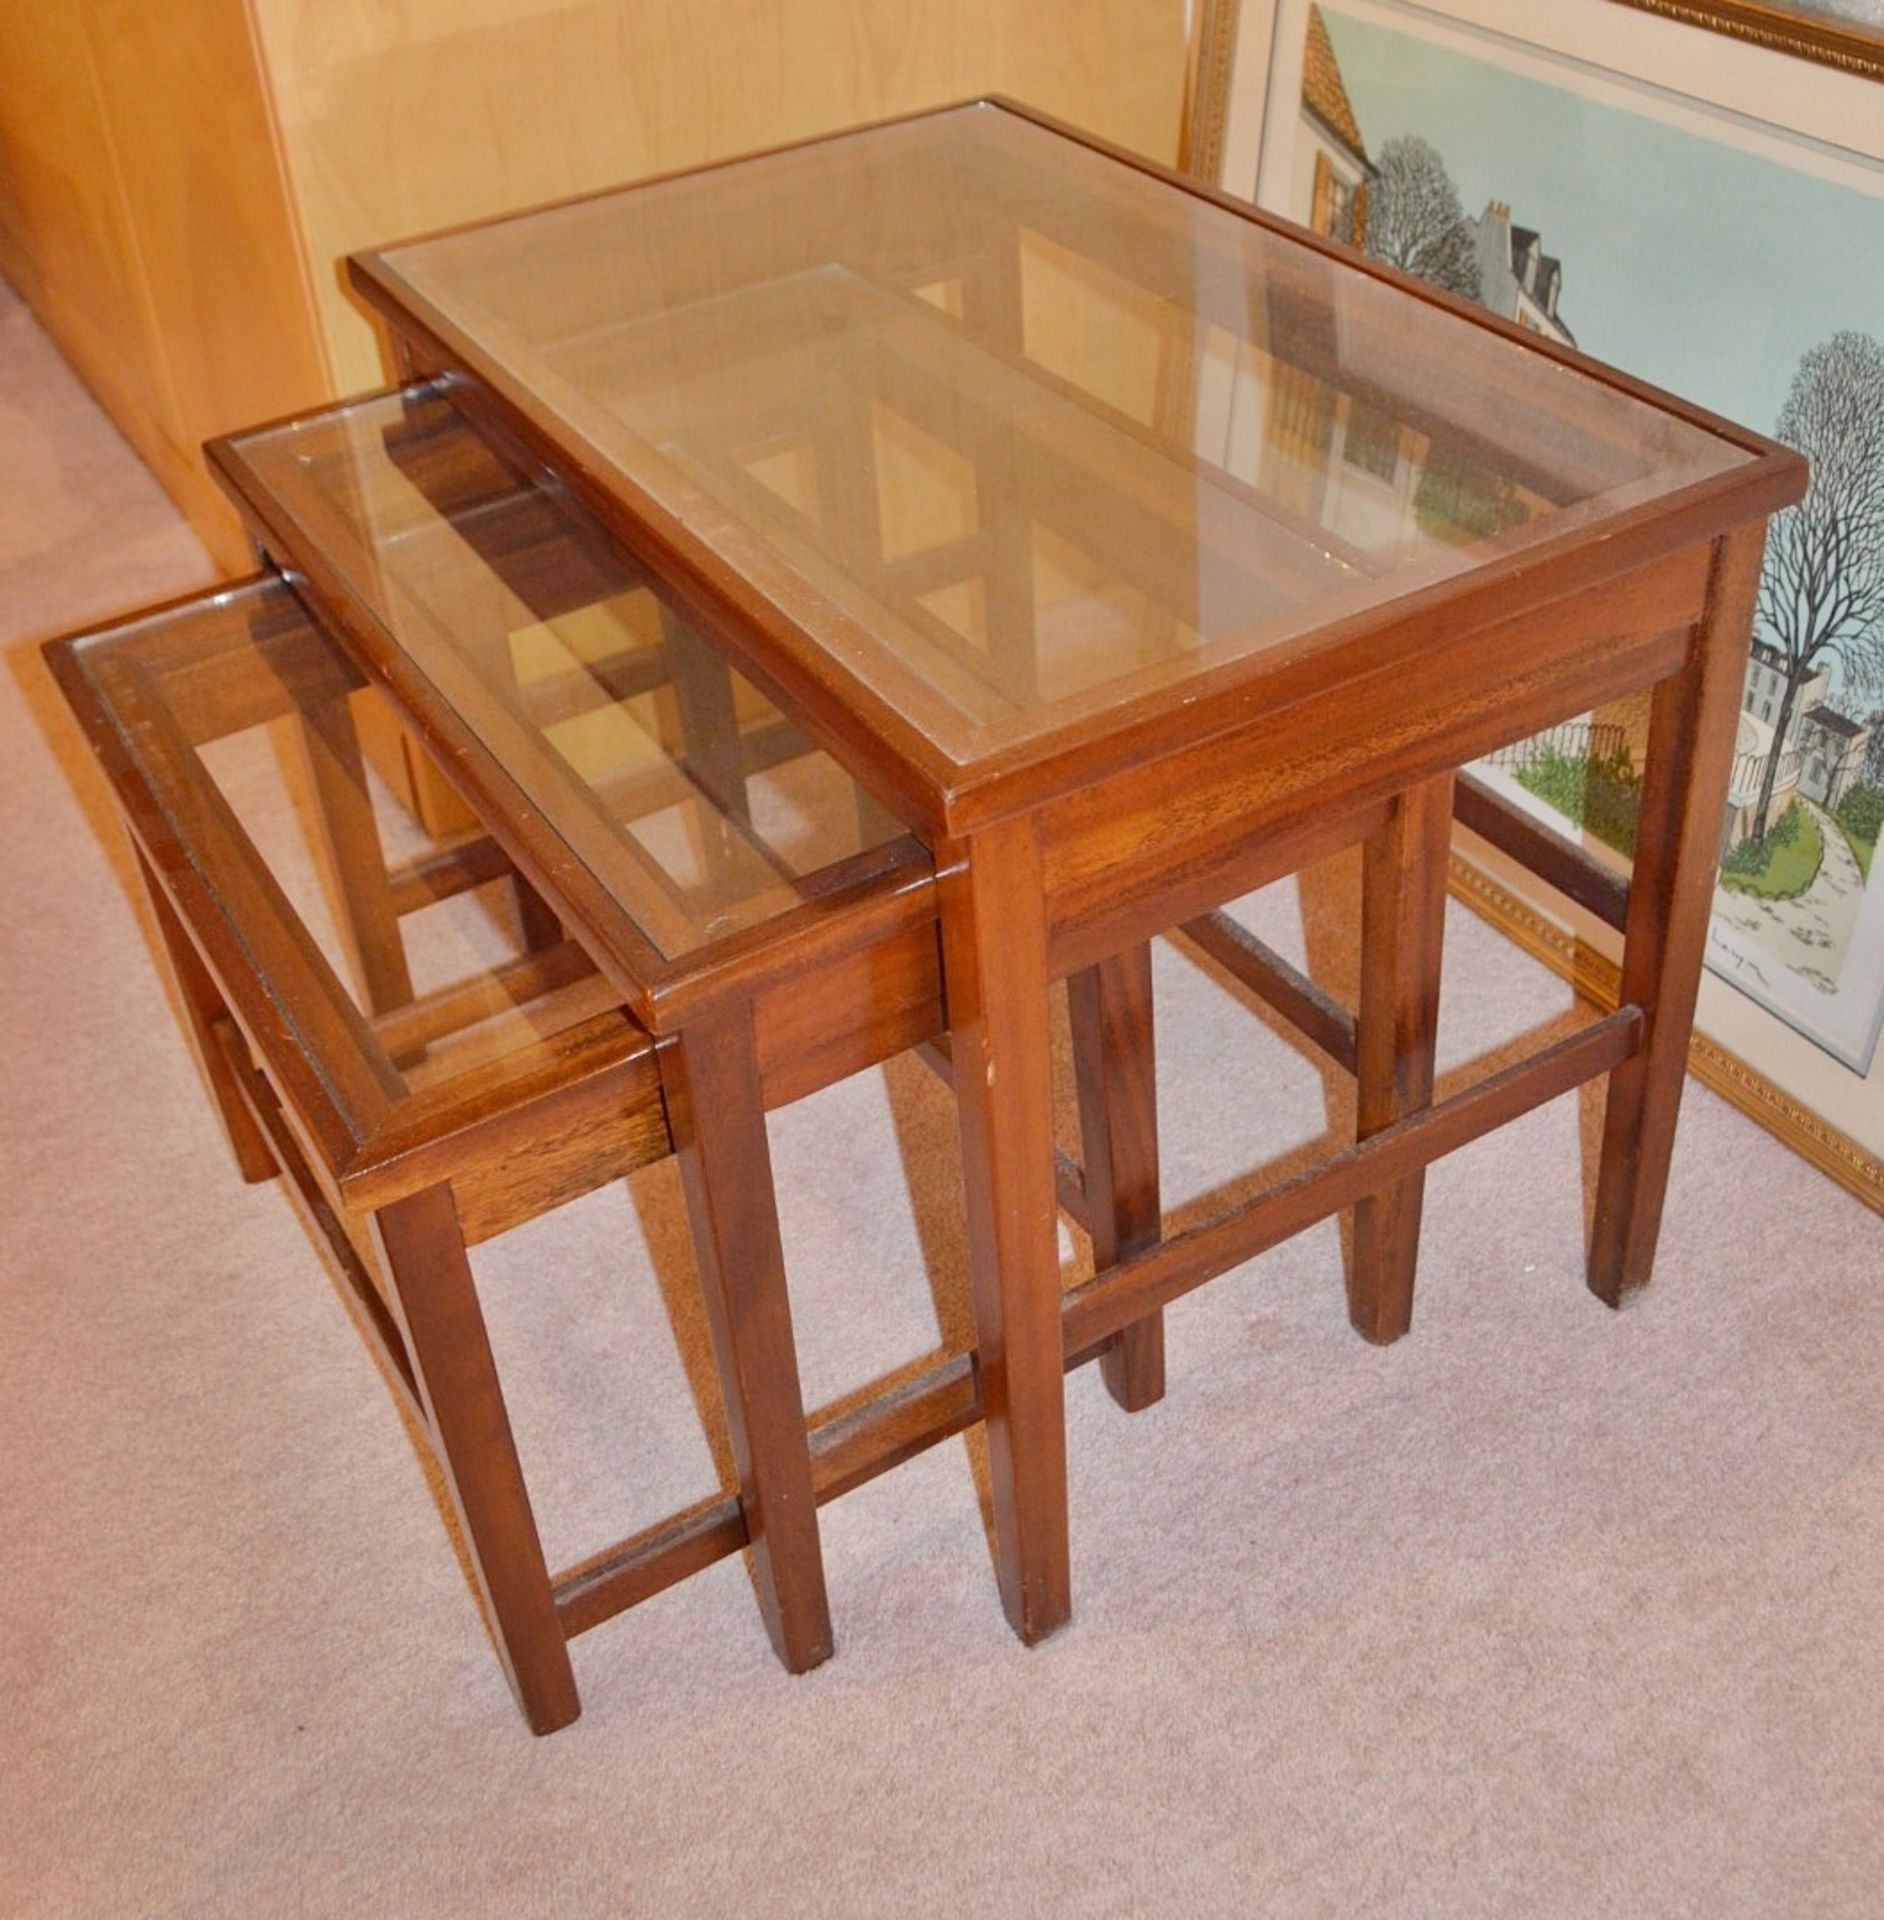 1 x Nest of Wooden Glass Topped Tables - CL368 - Bowdon WA14 - NO VAT - Image 4 of 8